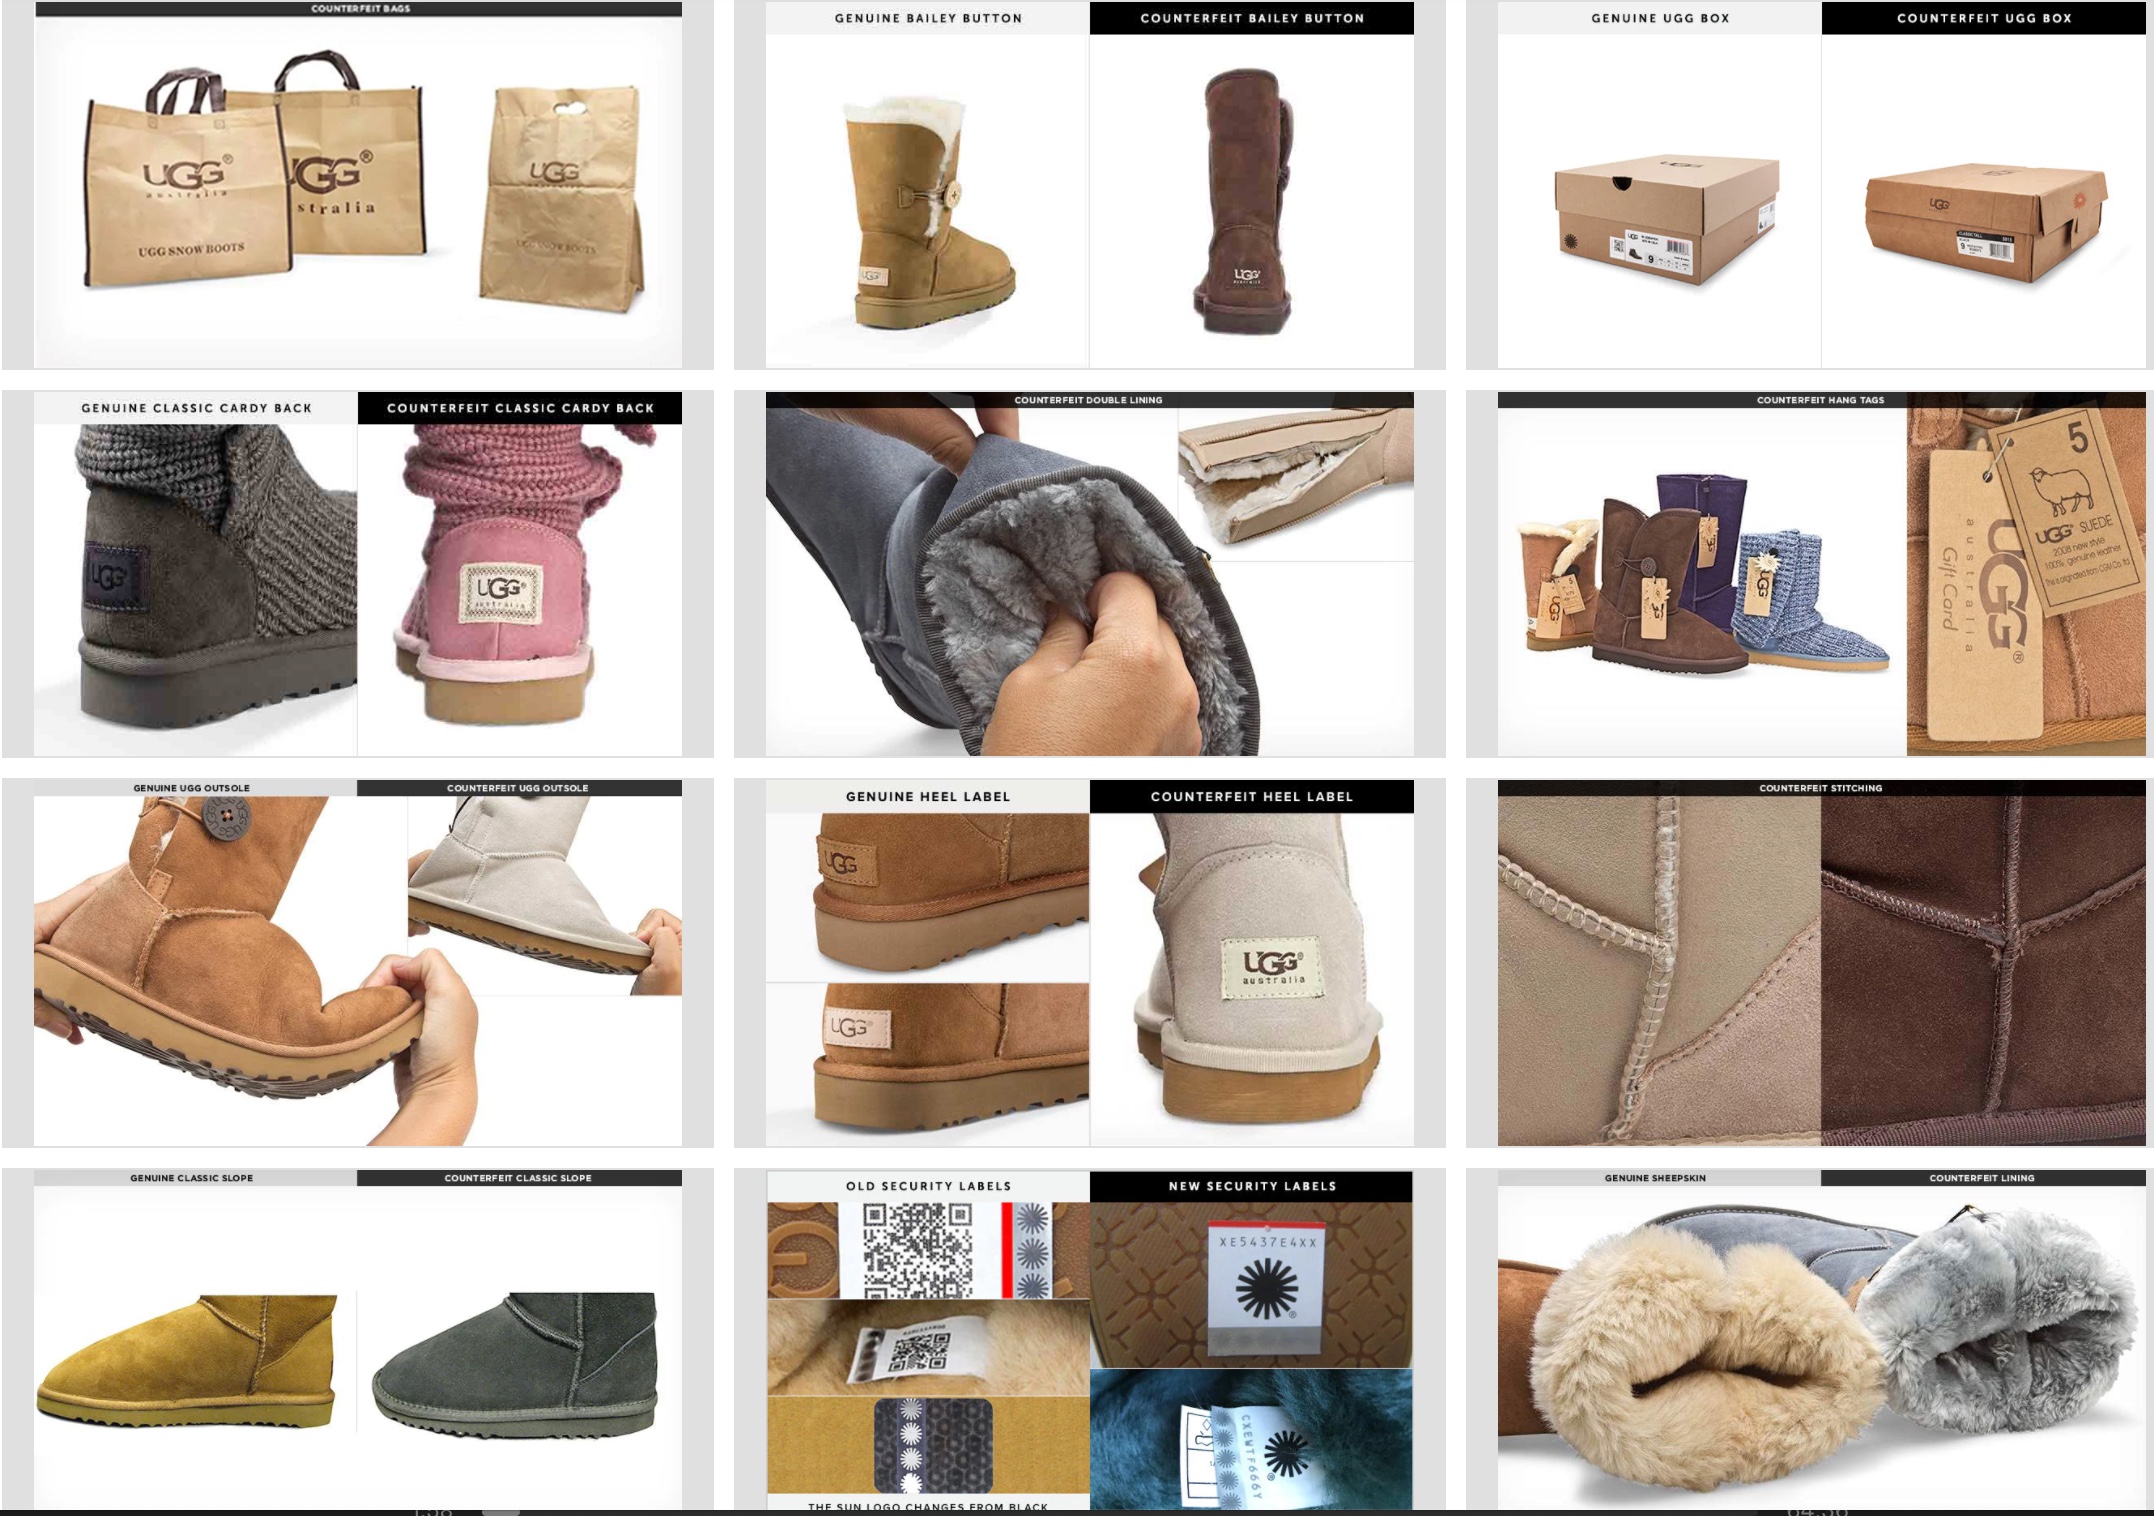 How to Know Your UGG Boots are Counterfeit Spry Sparrow